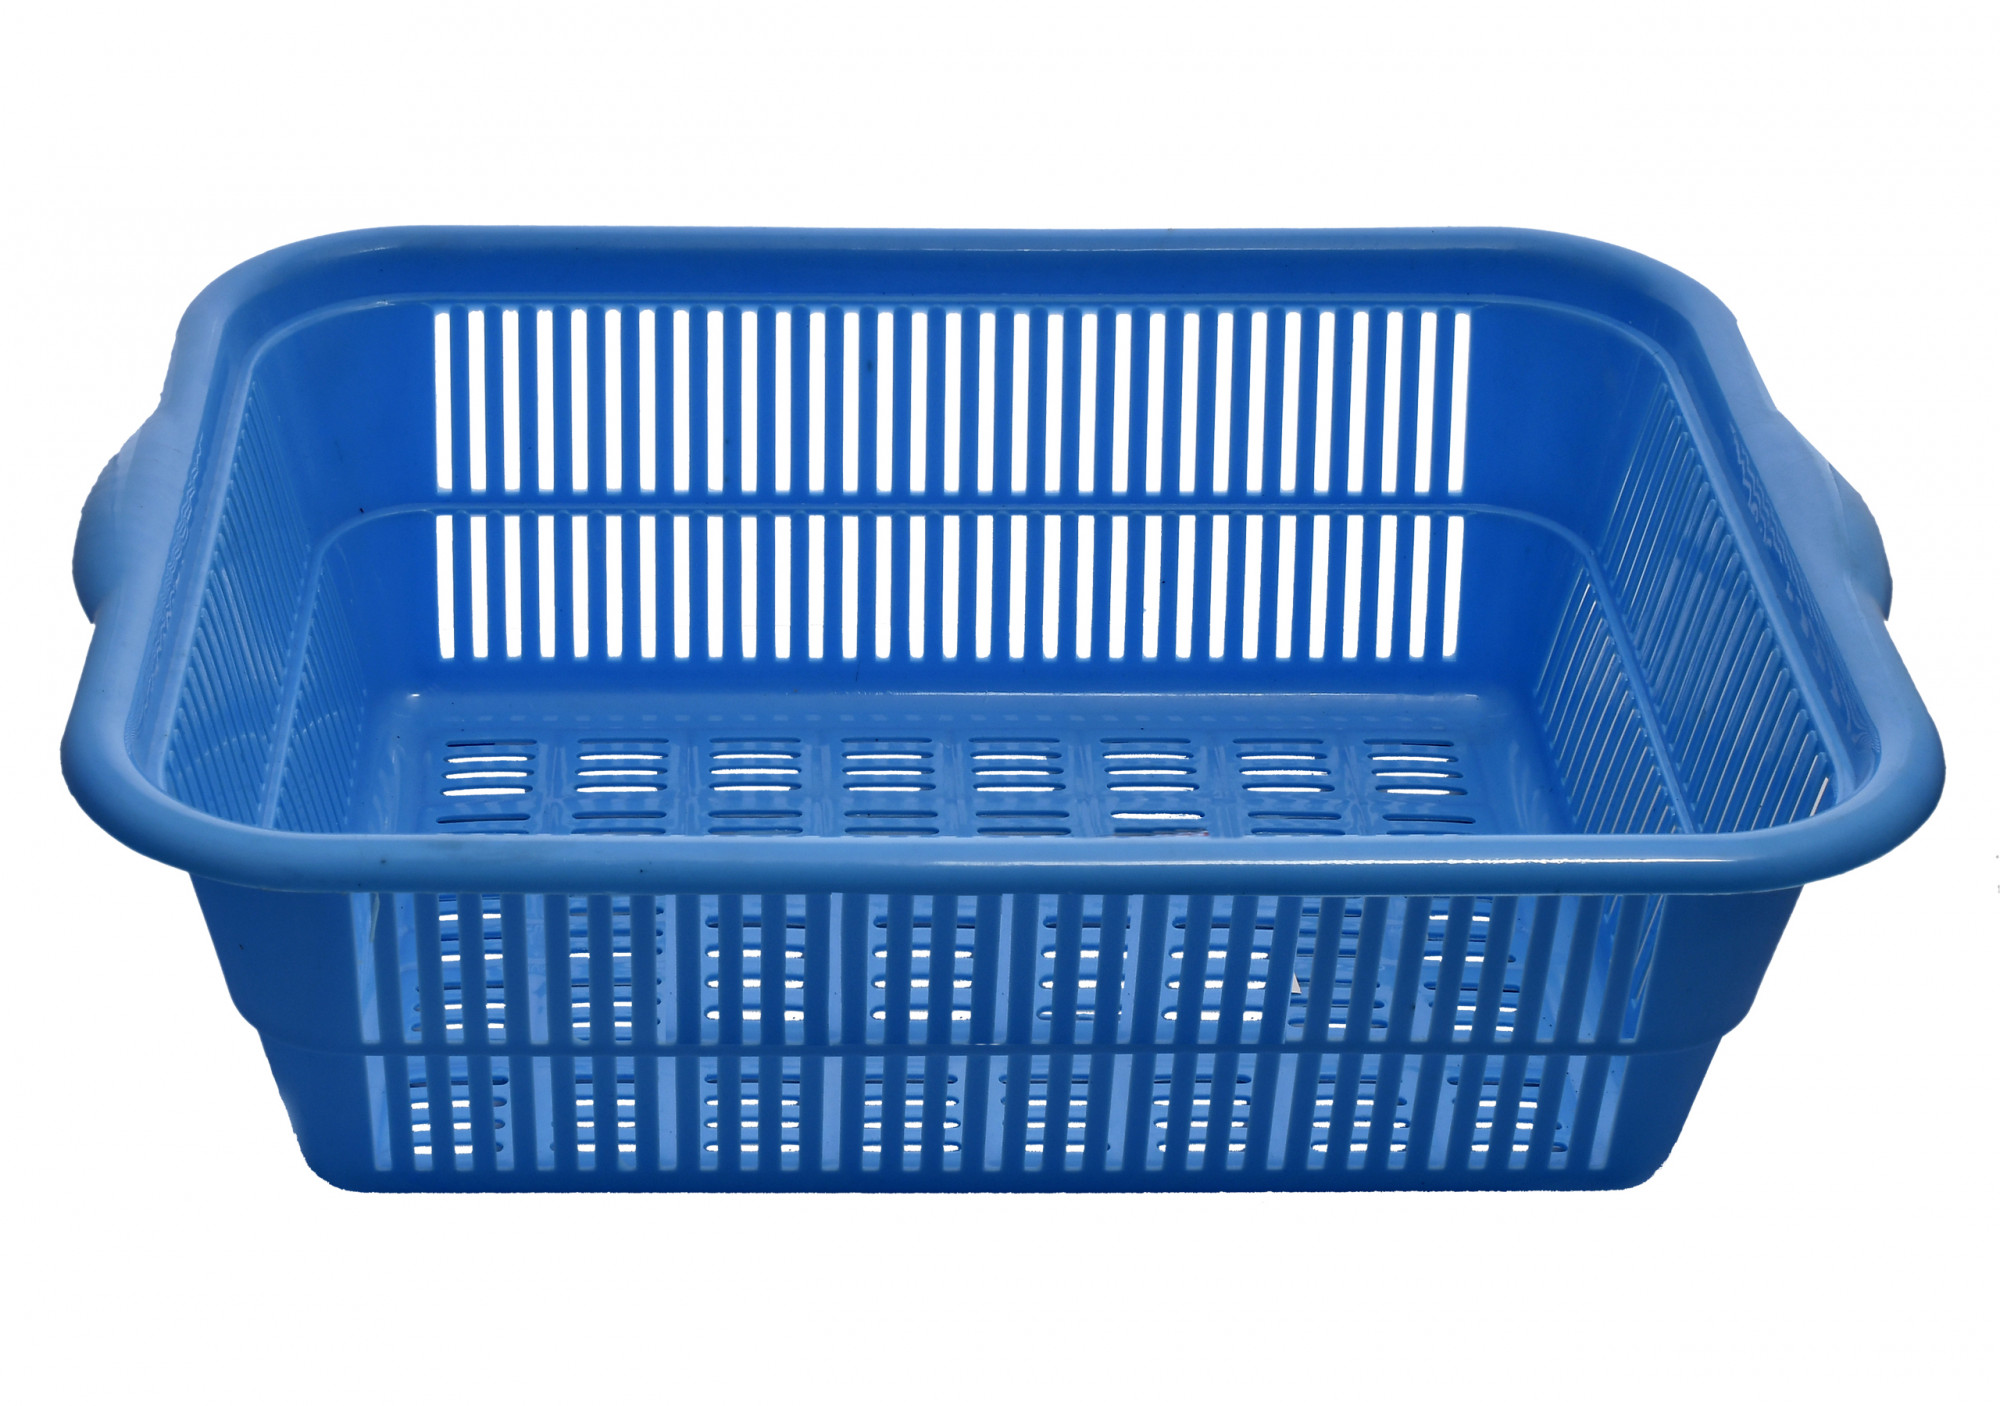 Kuber Industries 3 Pieces Plastic Kitchen Dish Rack Drainer Vegetables And Fruits Basket Dish Rack Multipurpose Organizers ,Small Size,Blue